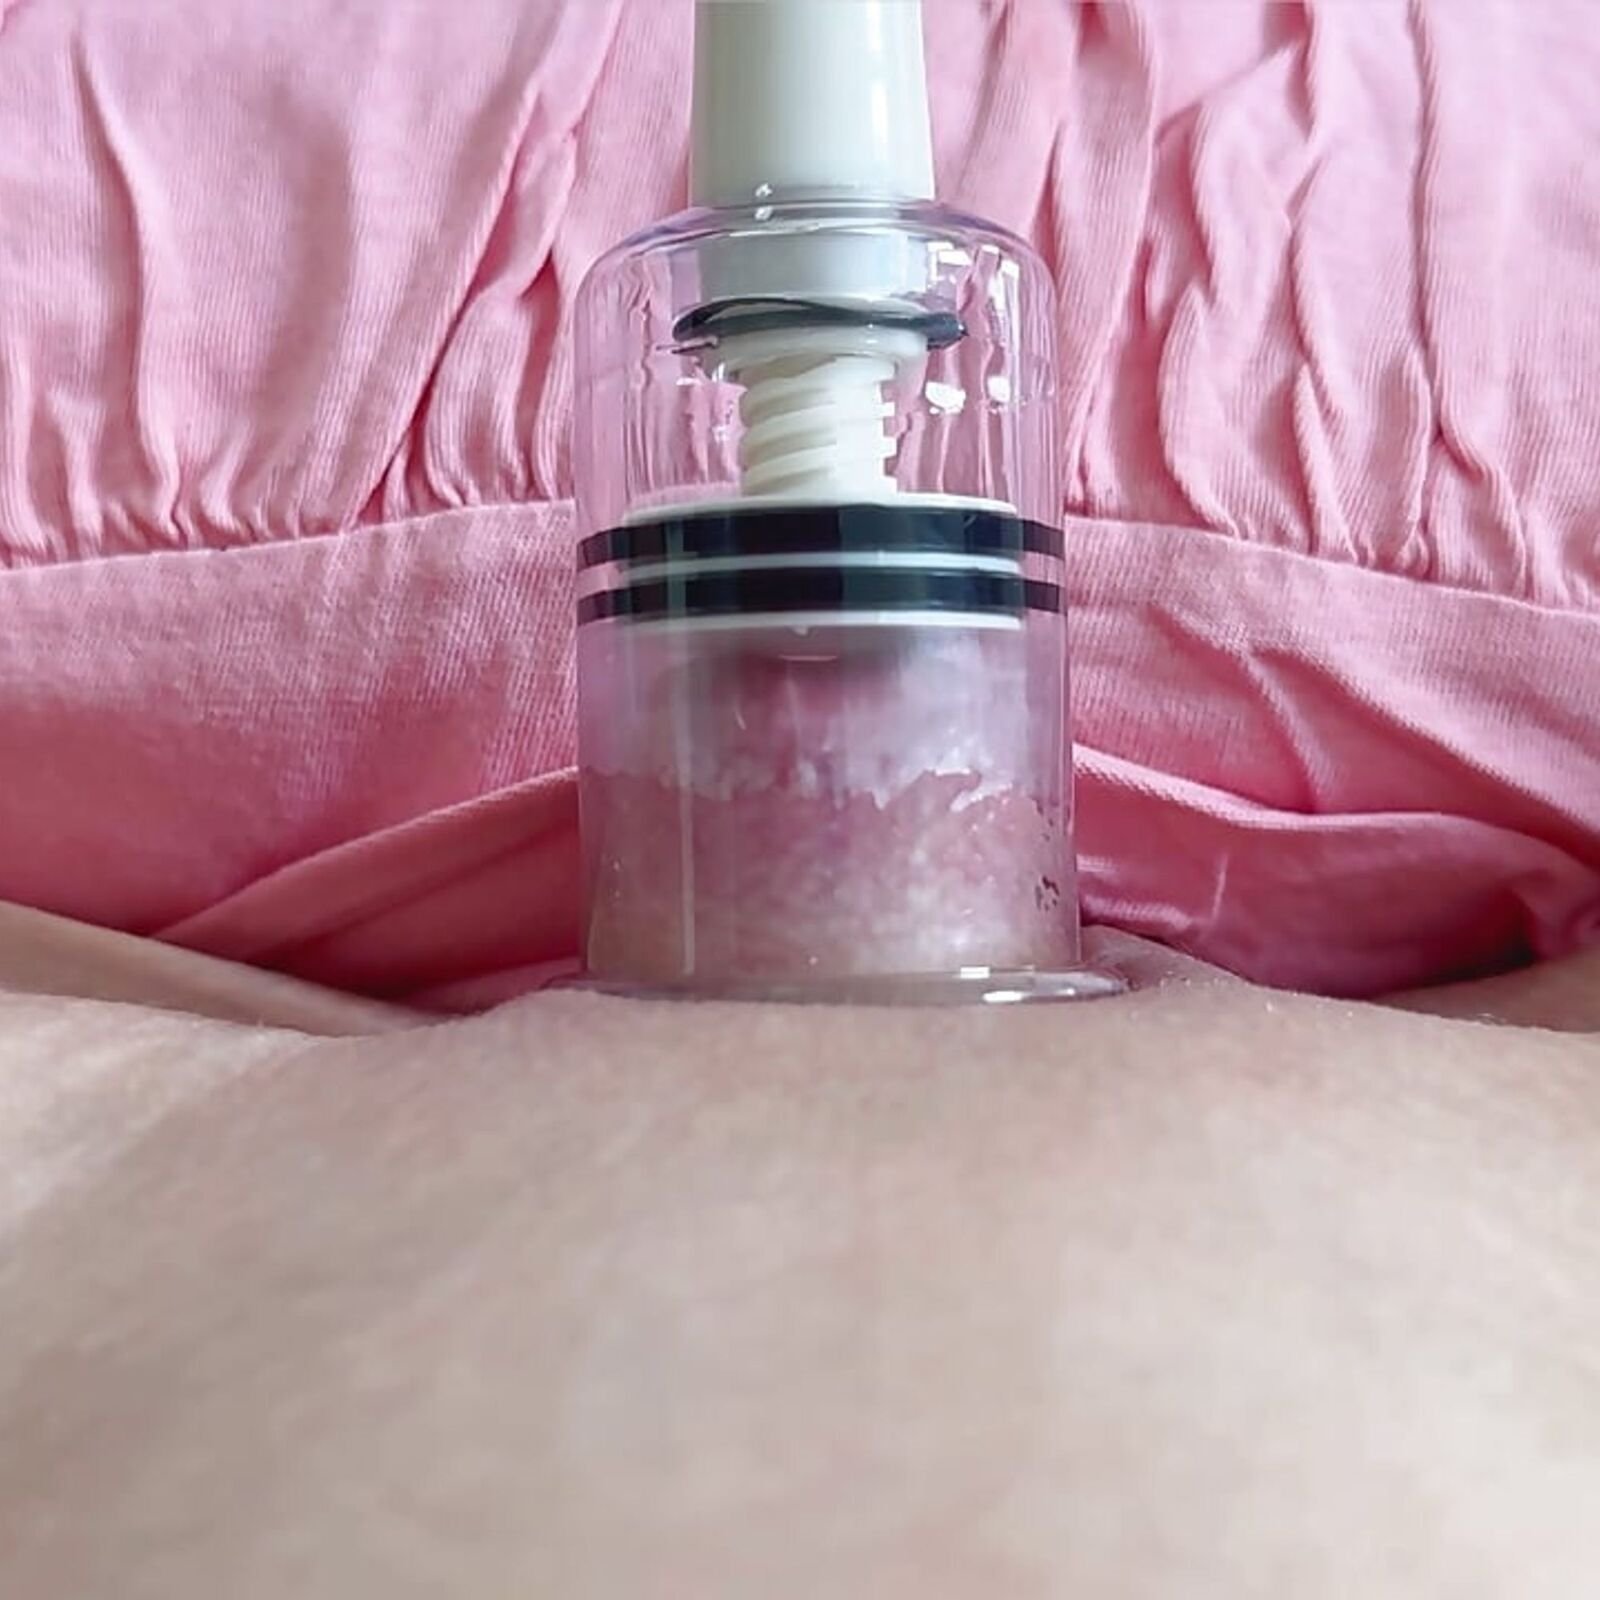 Pump on my clit and pink pussy! My clit got swollen and pulsating, I need someone to lick it